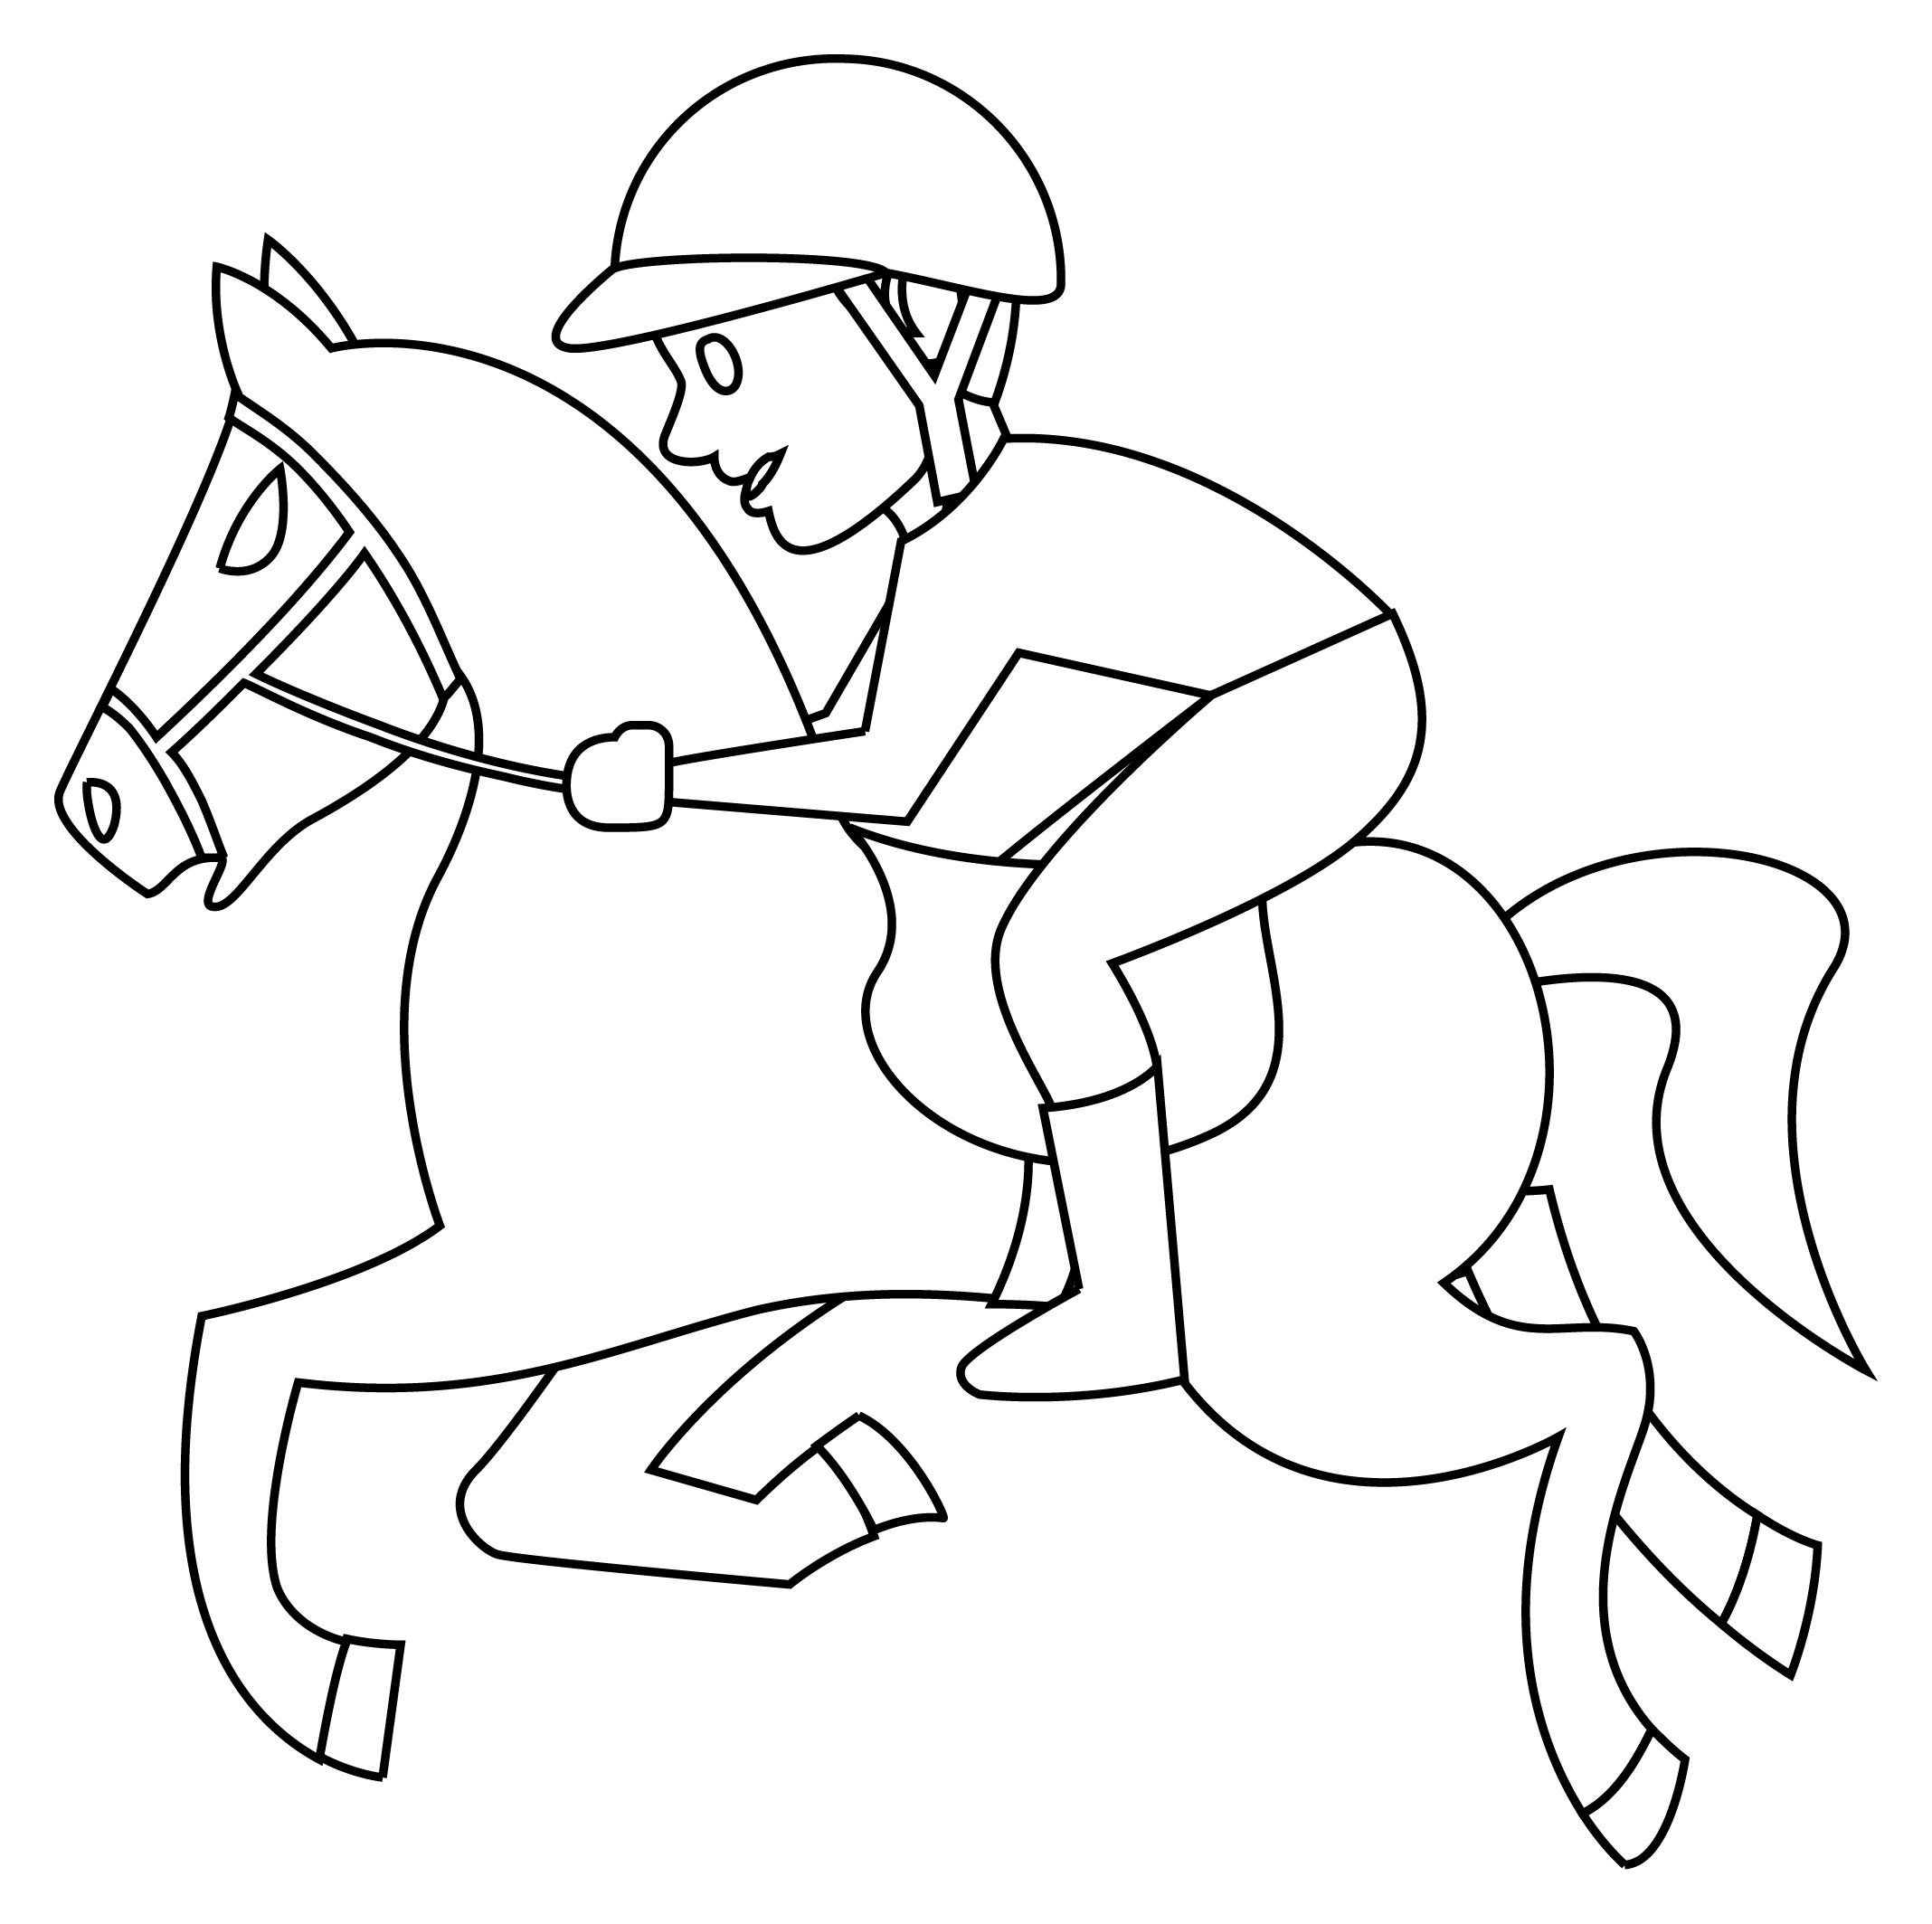 Cute race horse coloring page